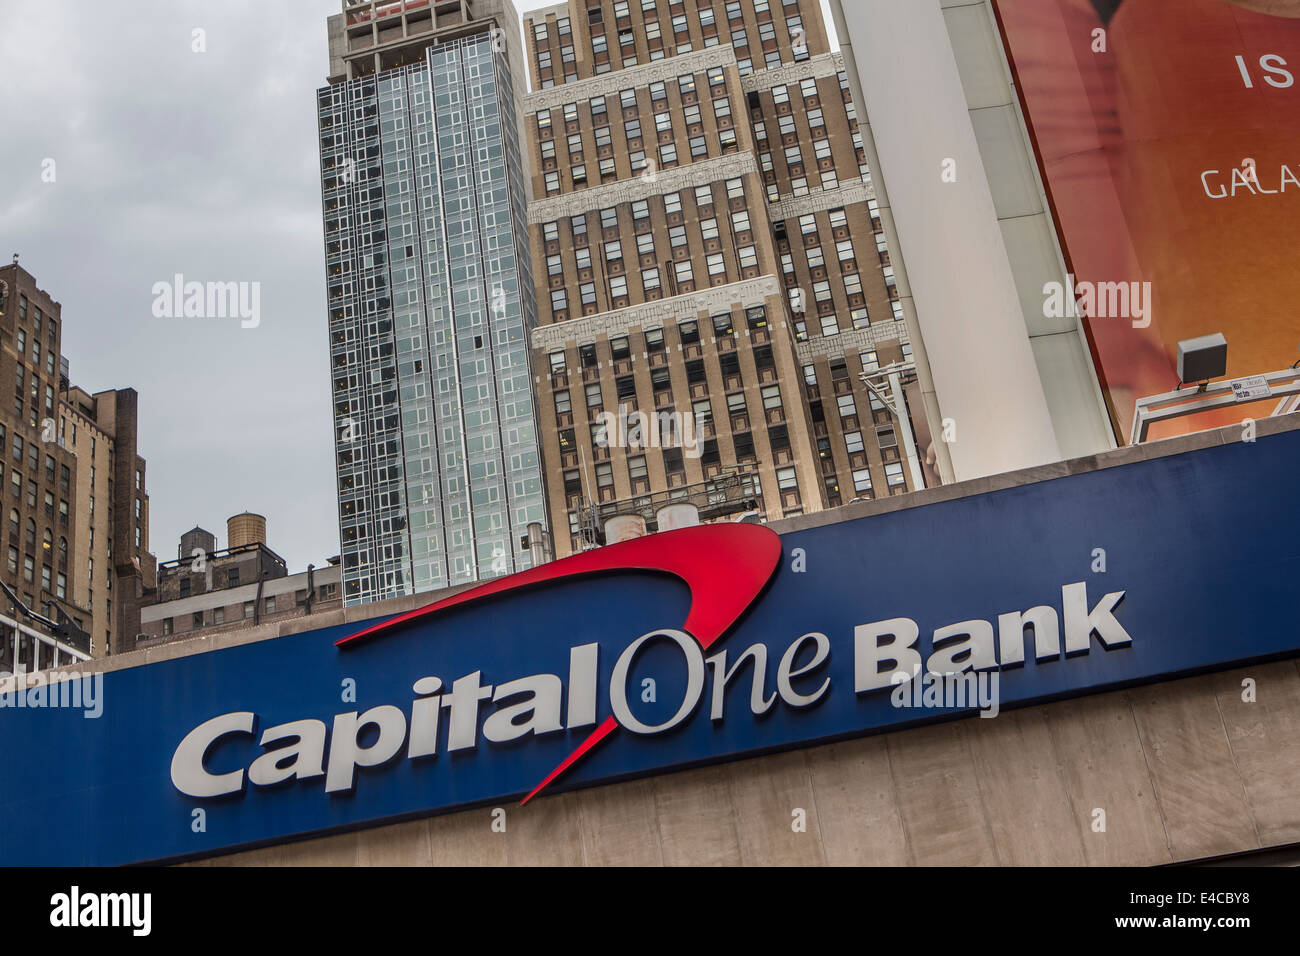 A Capital One Bank branch is pictured in the New York City borough of Manhattan, NY Stock Photo